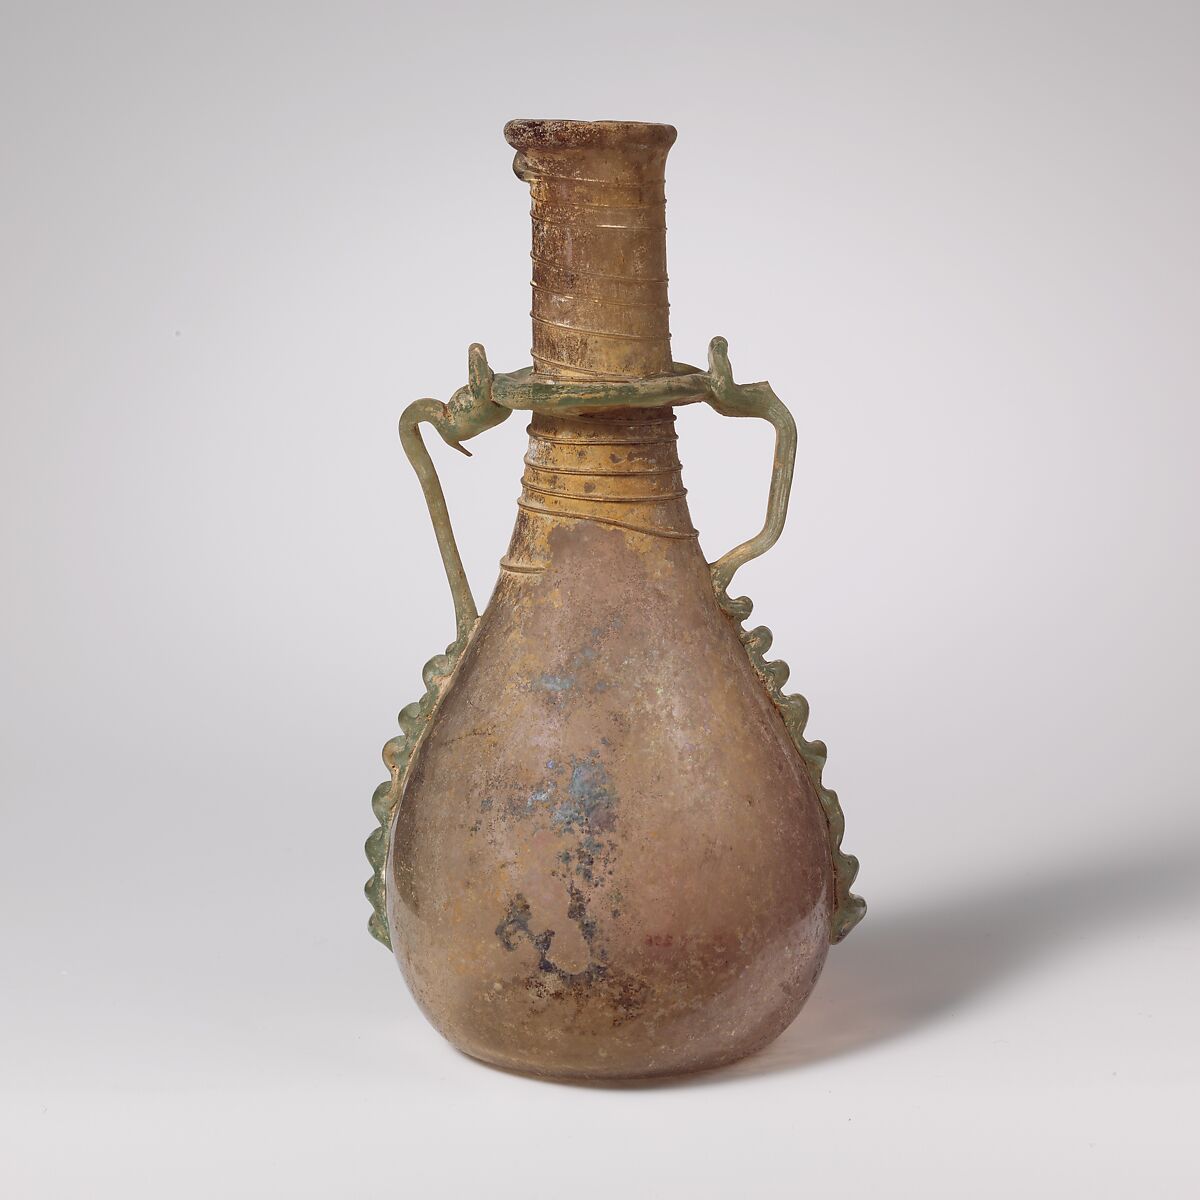 Glass two-handled bottle, Glass, Roman, Syrian 